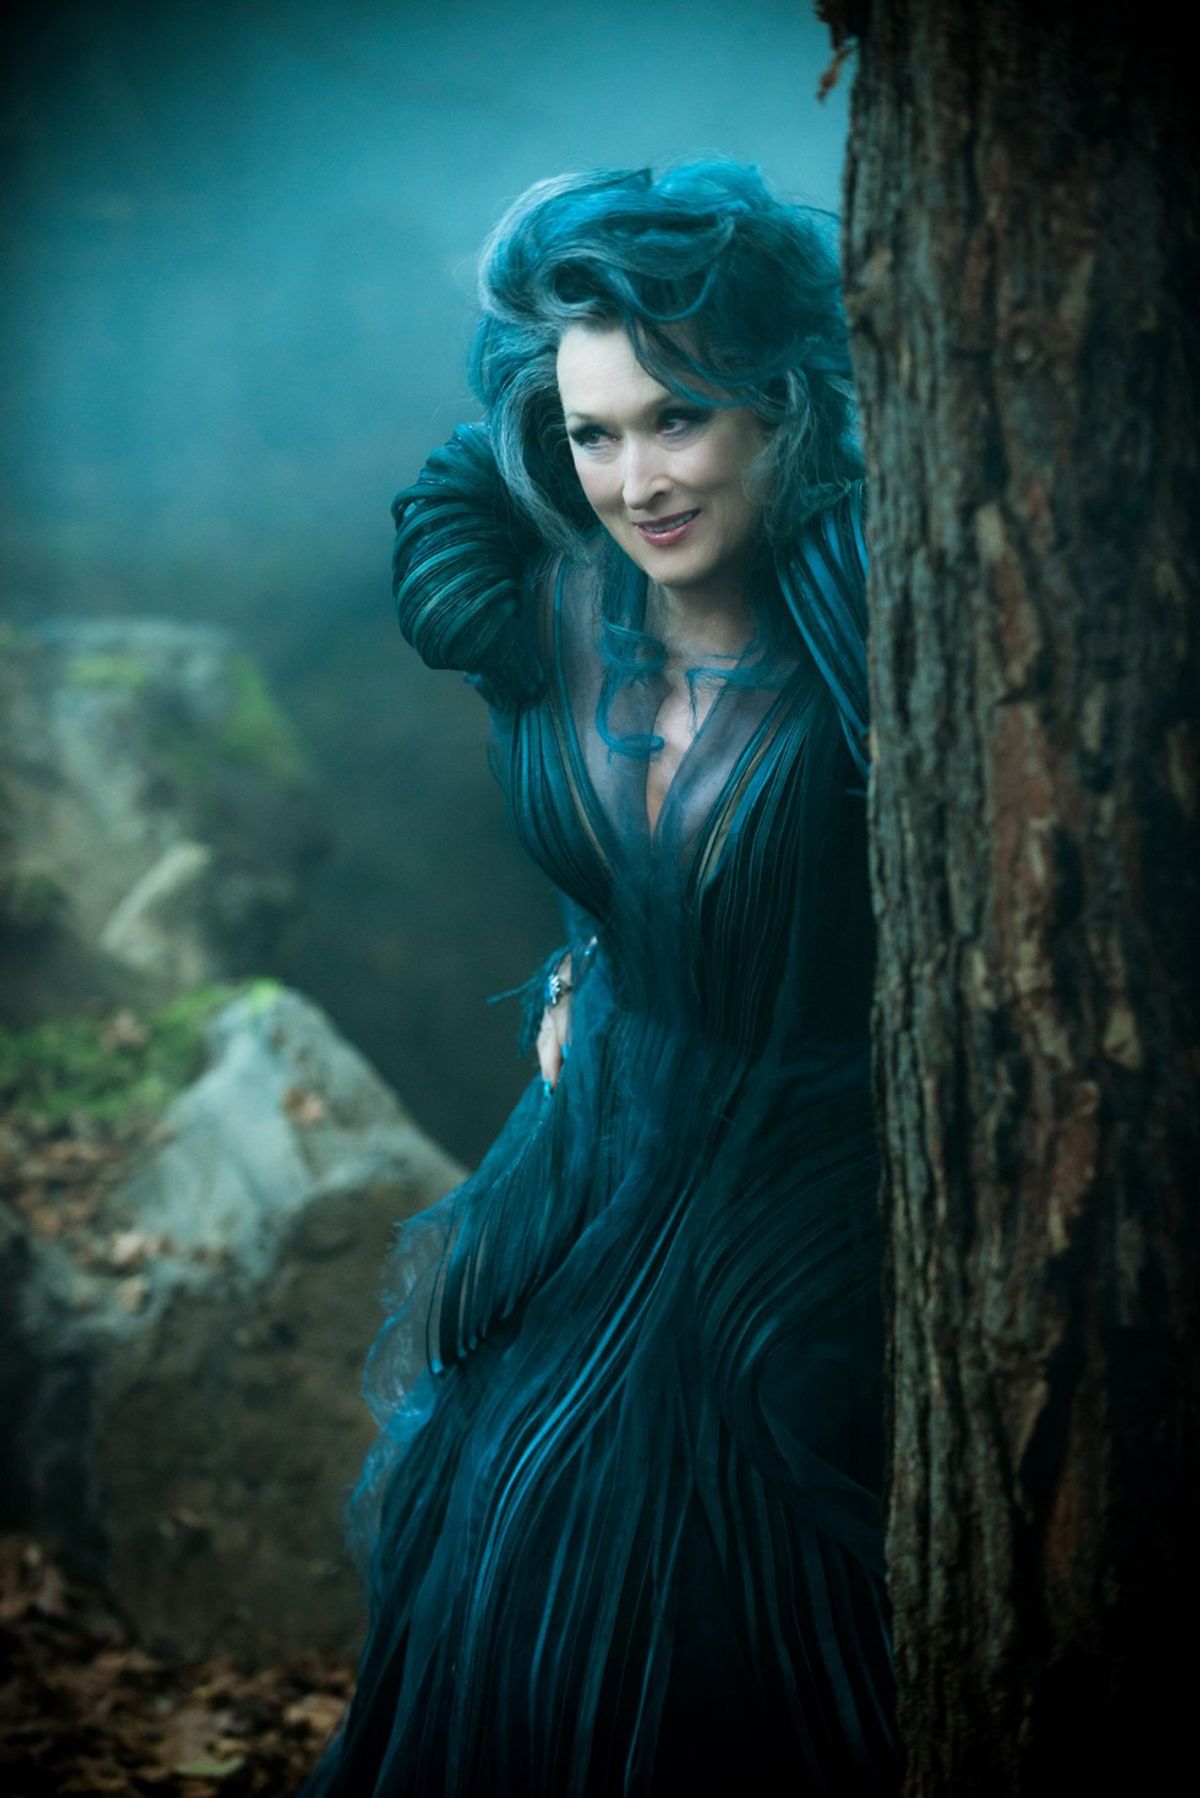 An Analysis Of The Witch In "Into the Woods"